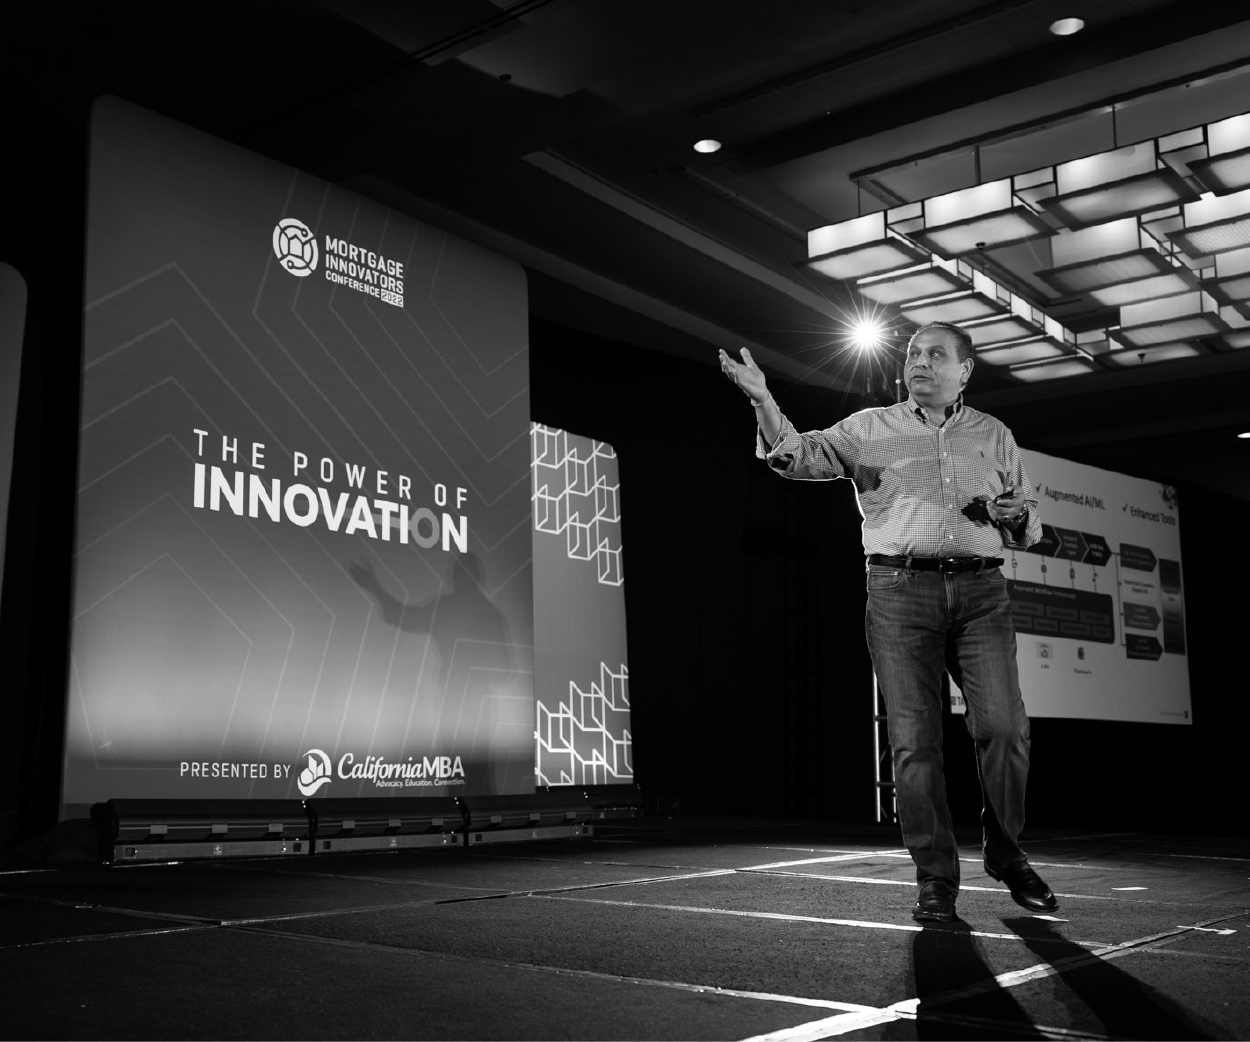 Mortgage Innovators Conference 2022 took place at the Hilton Anaheim. The conference wanted to celebrate what's “next” in mortgage tech, hear from some of the leading-edge experts, view exciting demos, and collaborate in an immersive networking experience.